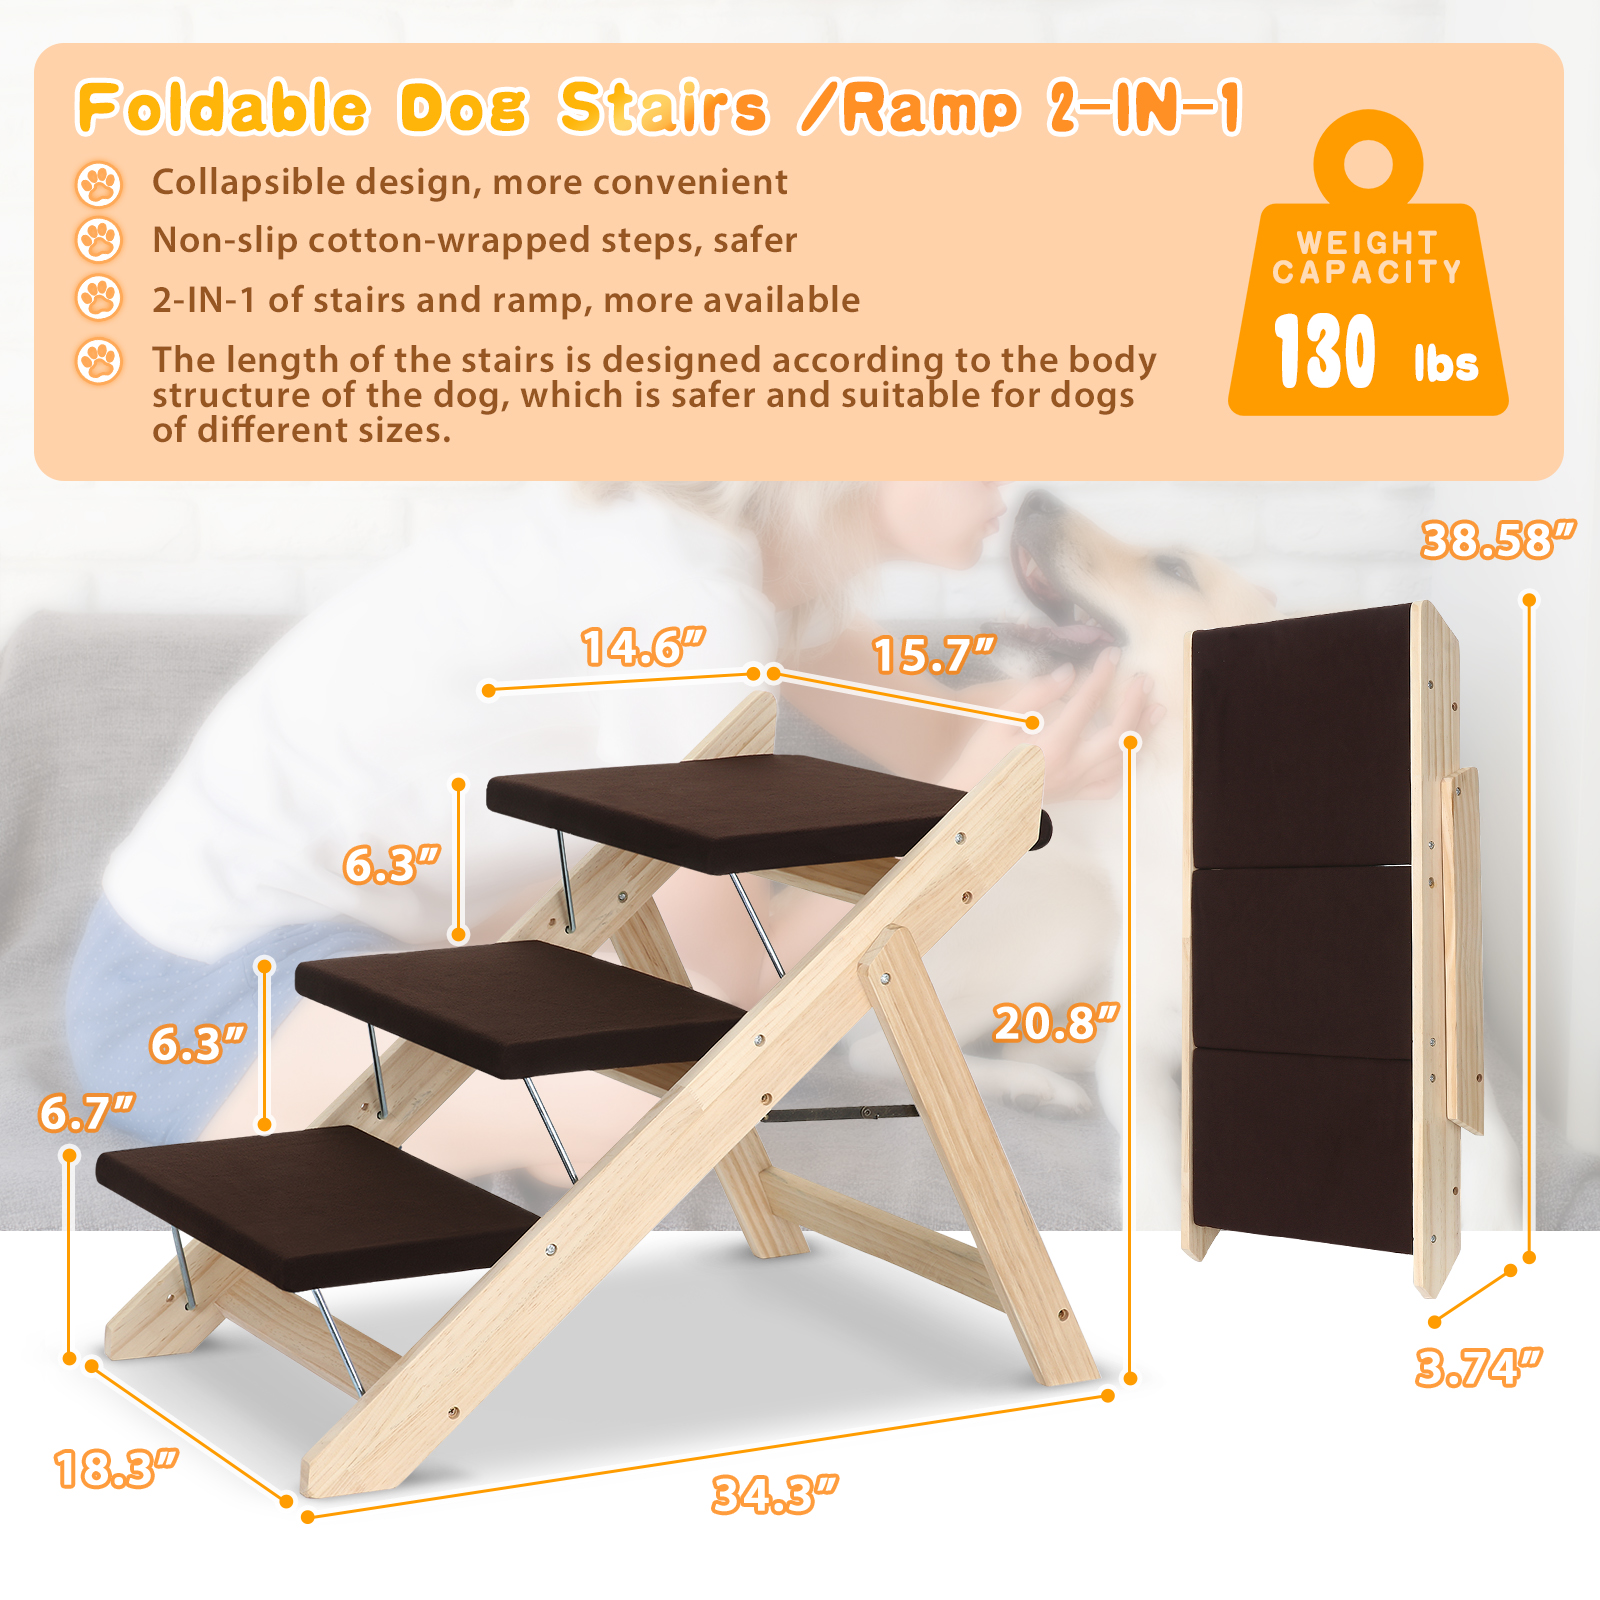 PawGiant-2in1-Dog-Stairs--Ramp-Foldable-Wide-Step-for-High-Beds-Couch-and-Cars-for-Small-Medium-and--1957281-7